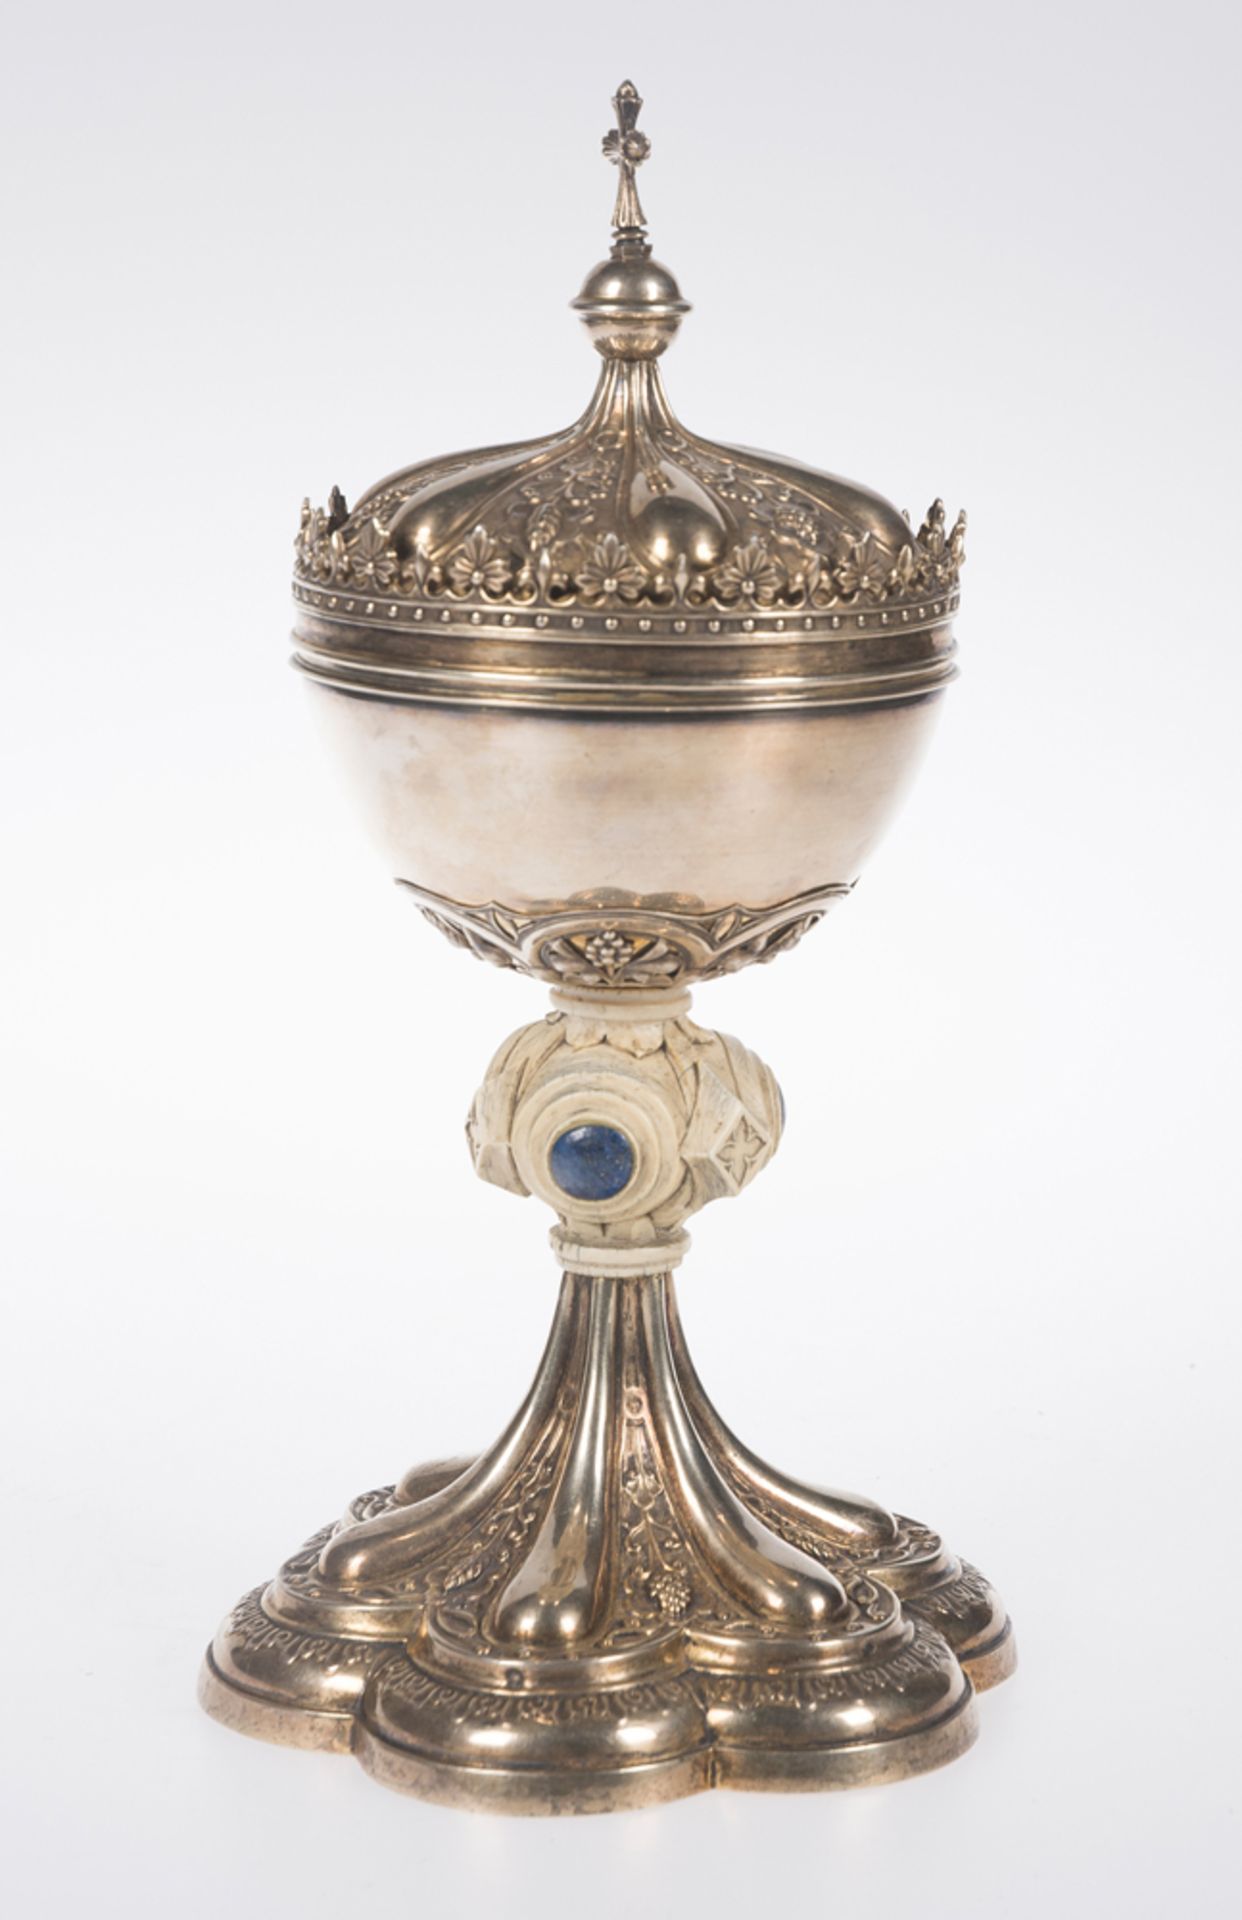 Embossed, chased and gilded silver pyx with ivory and lapis lazuli. France. Neo gothic. Late 19th